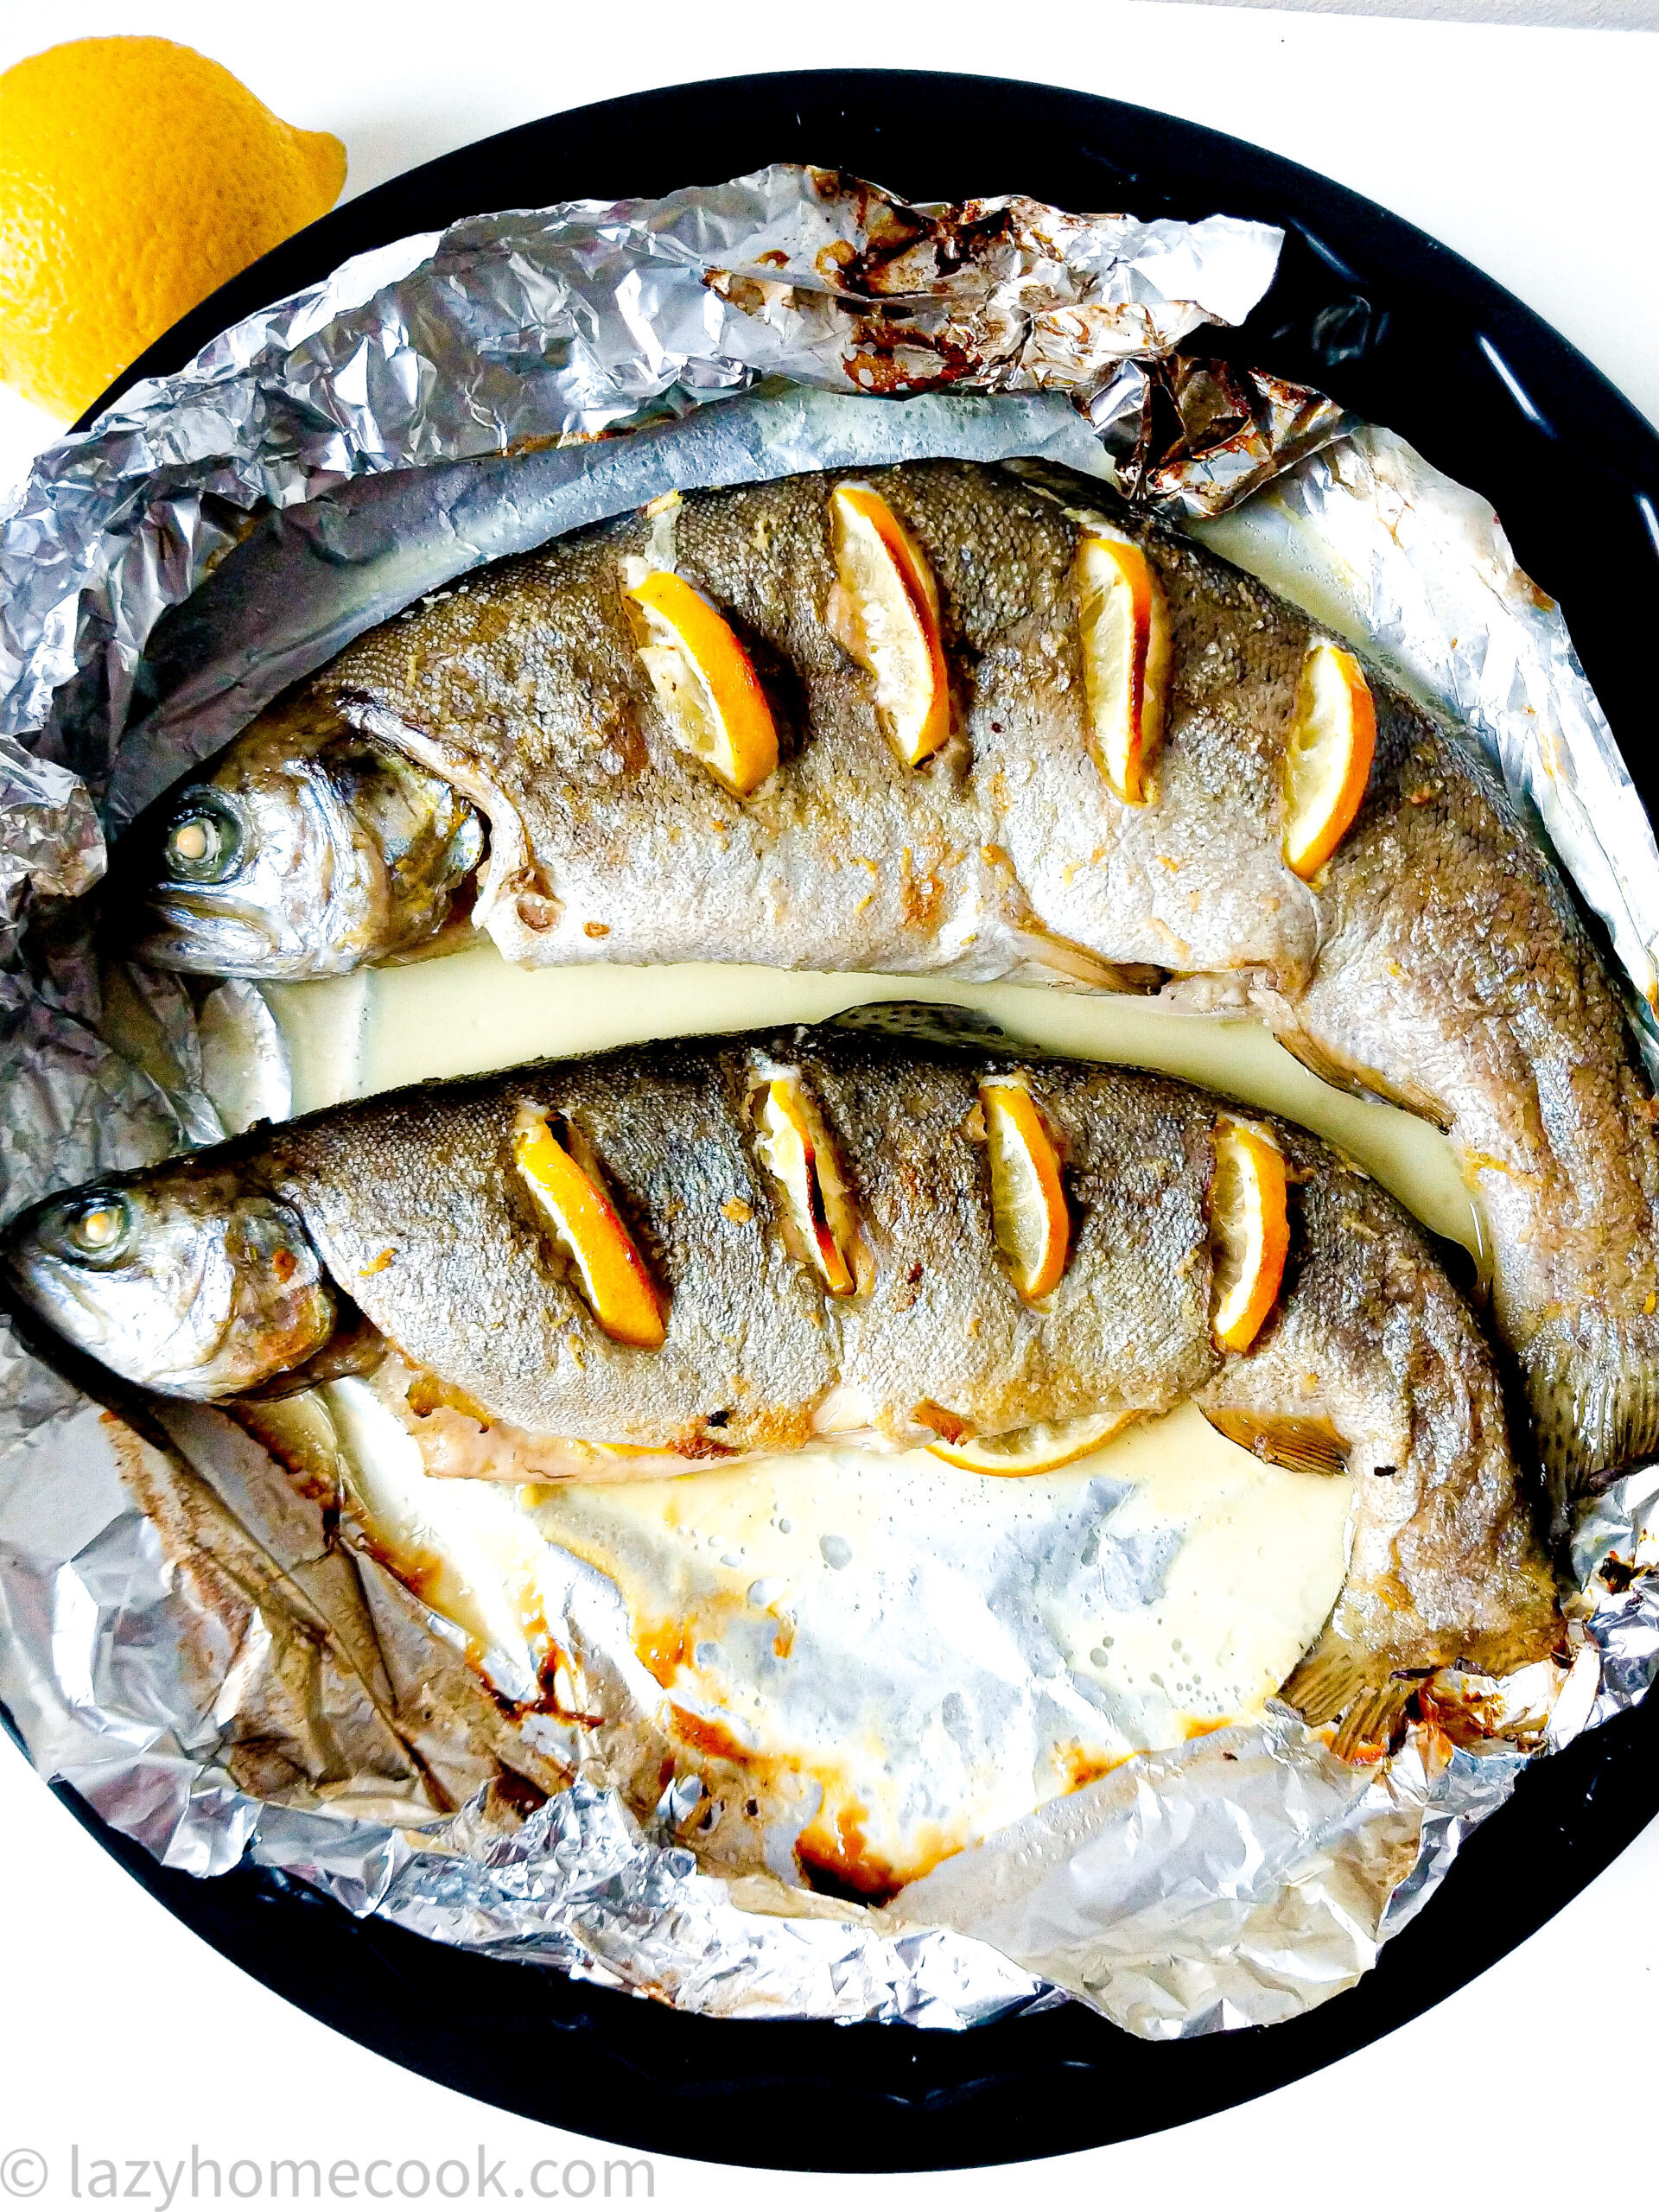 Oven baked whole trout with lemon, ginger and white wine